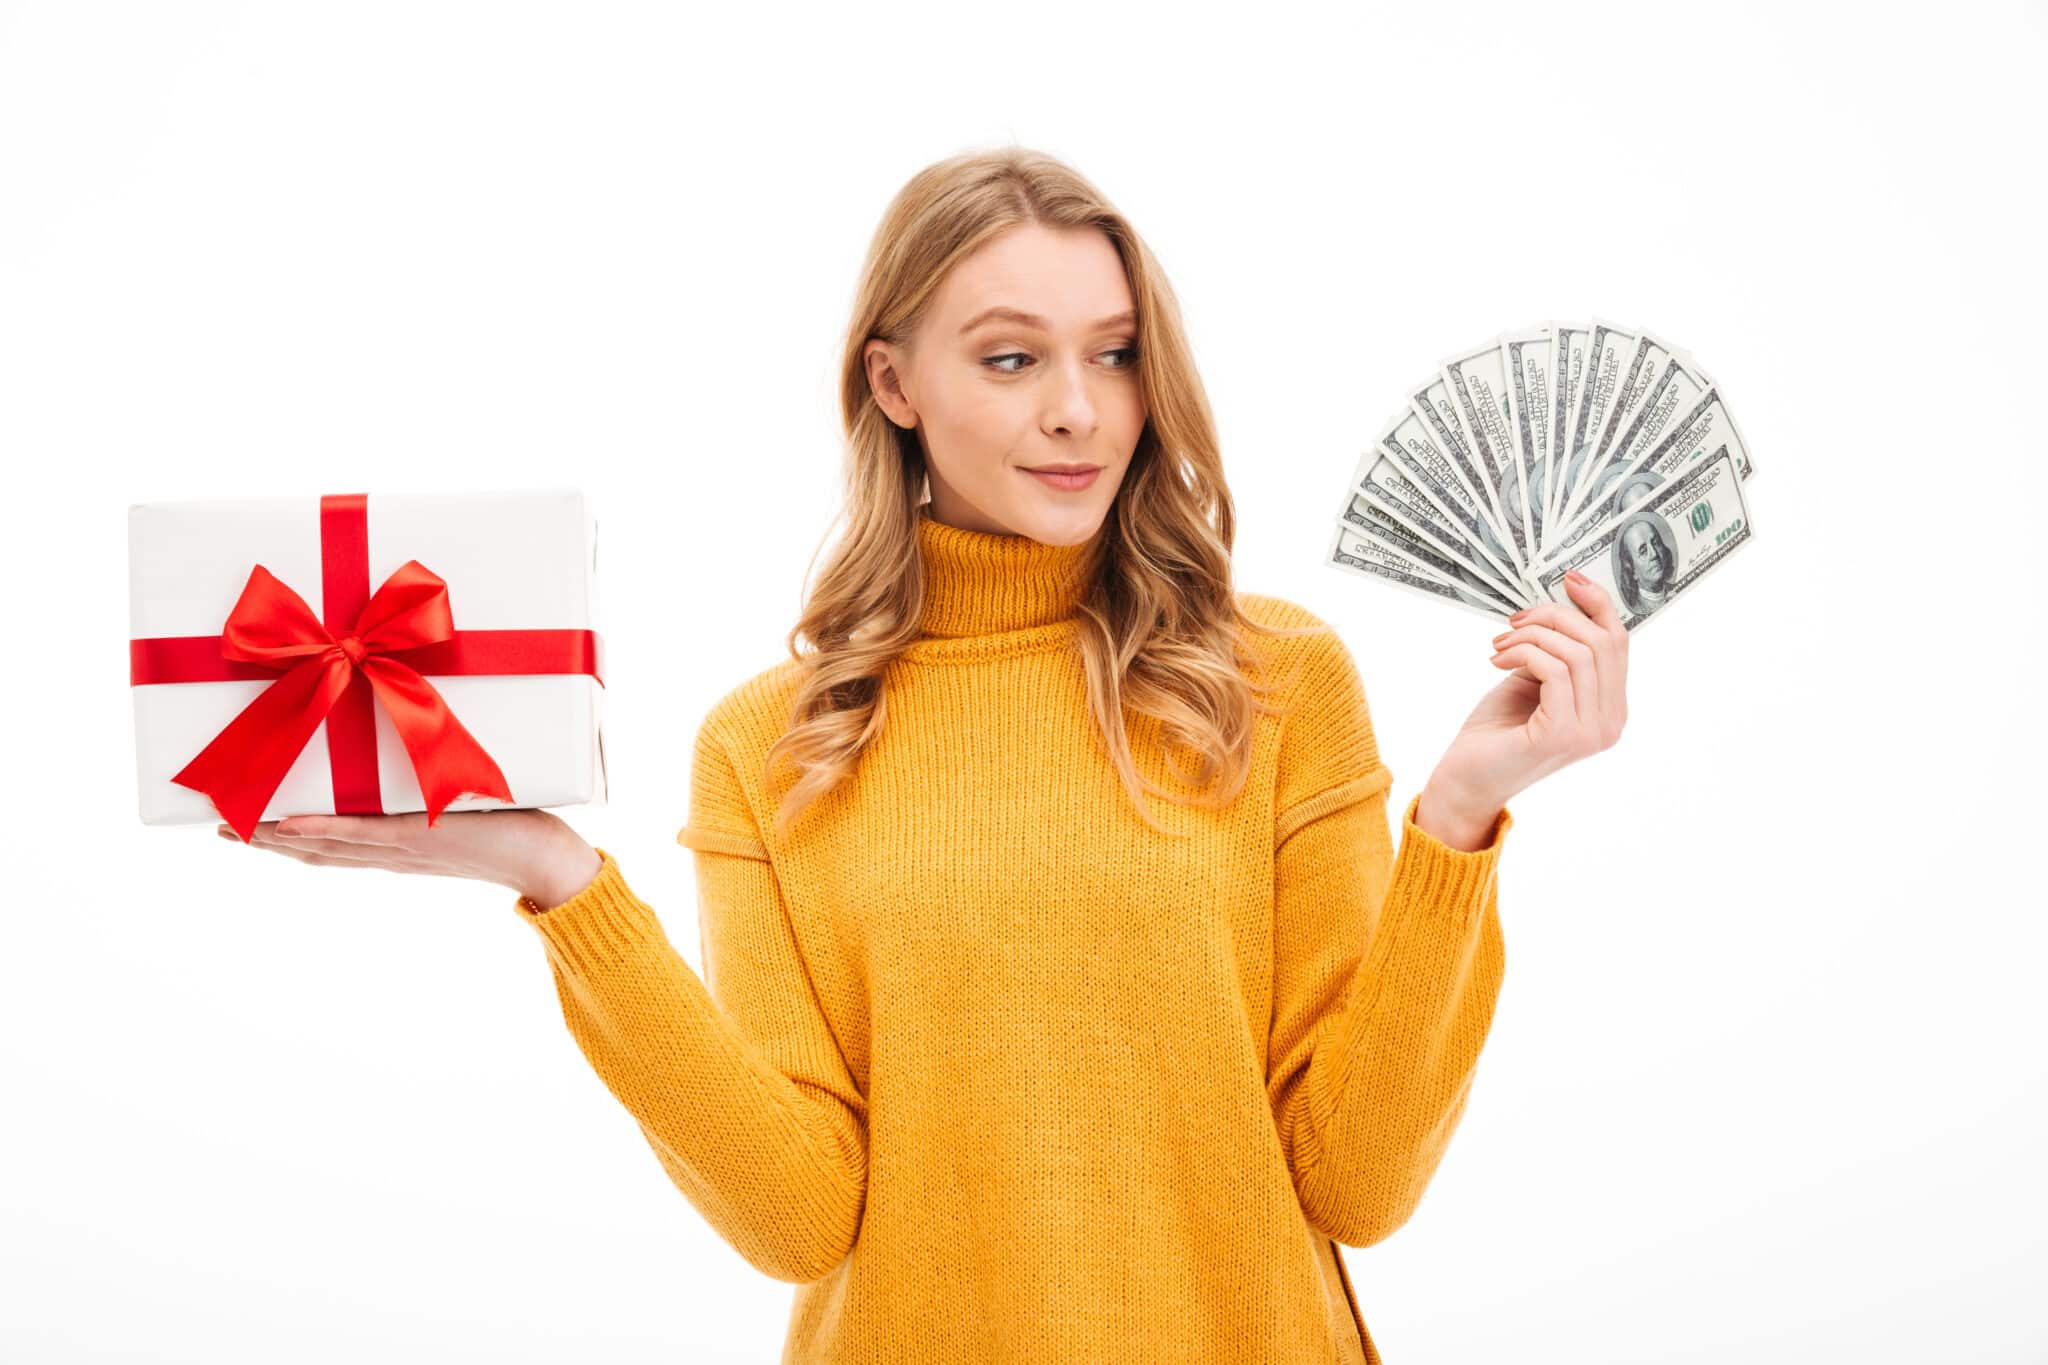 A woman holding money and a gift box, showcasing creative ideas for gifting cash on a white background.